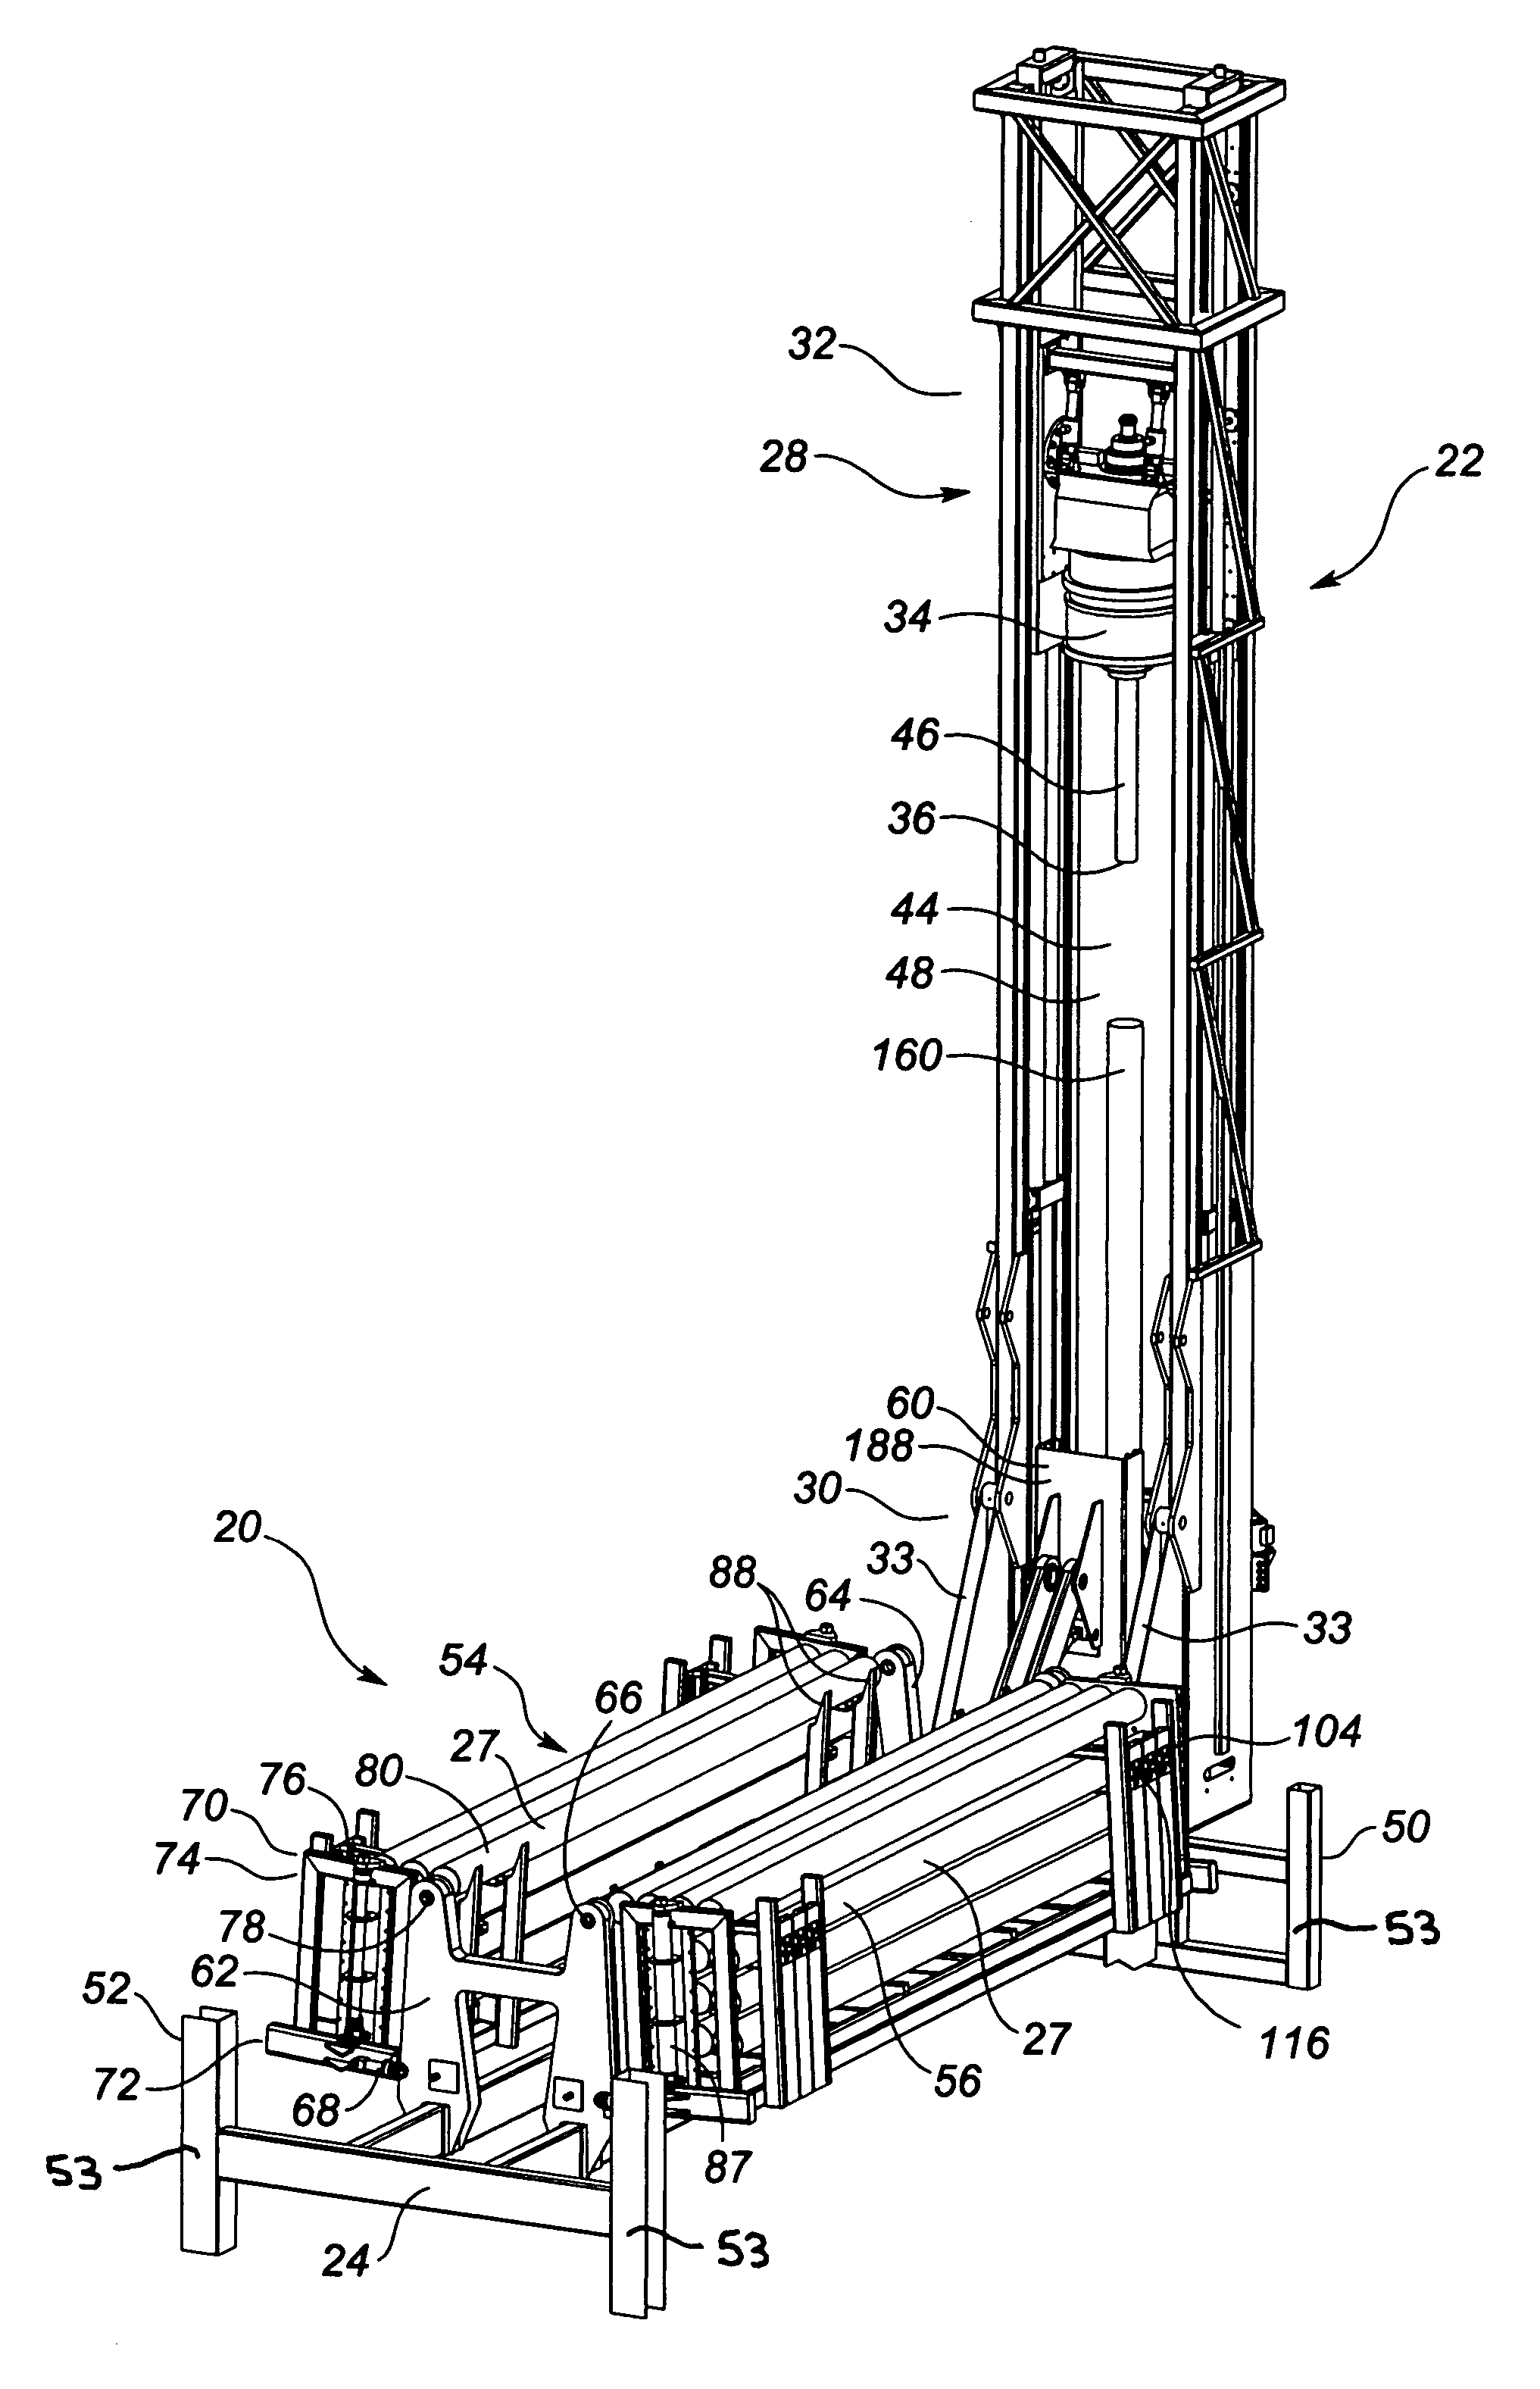 Apparatus and method for handling pipe sections